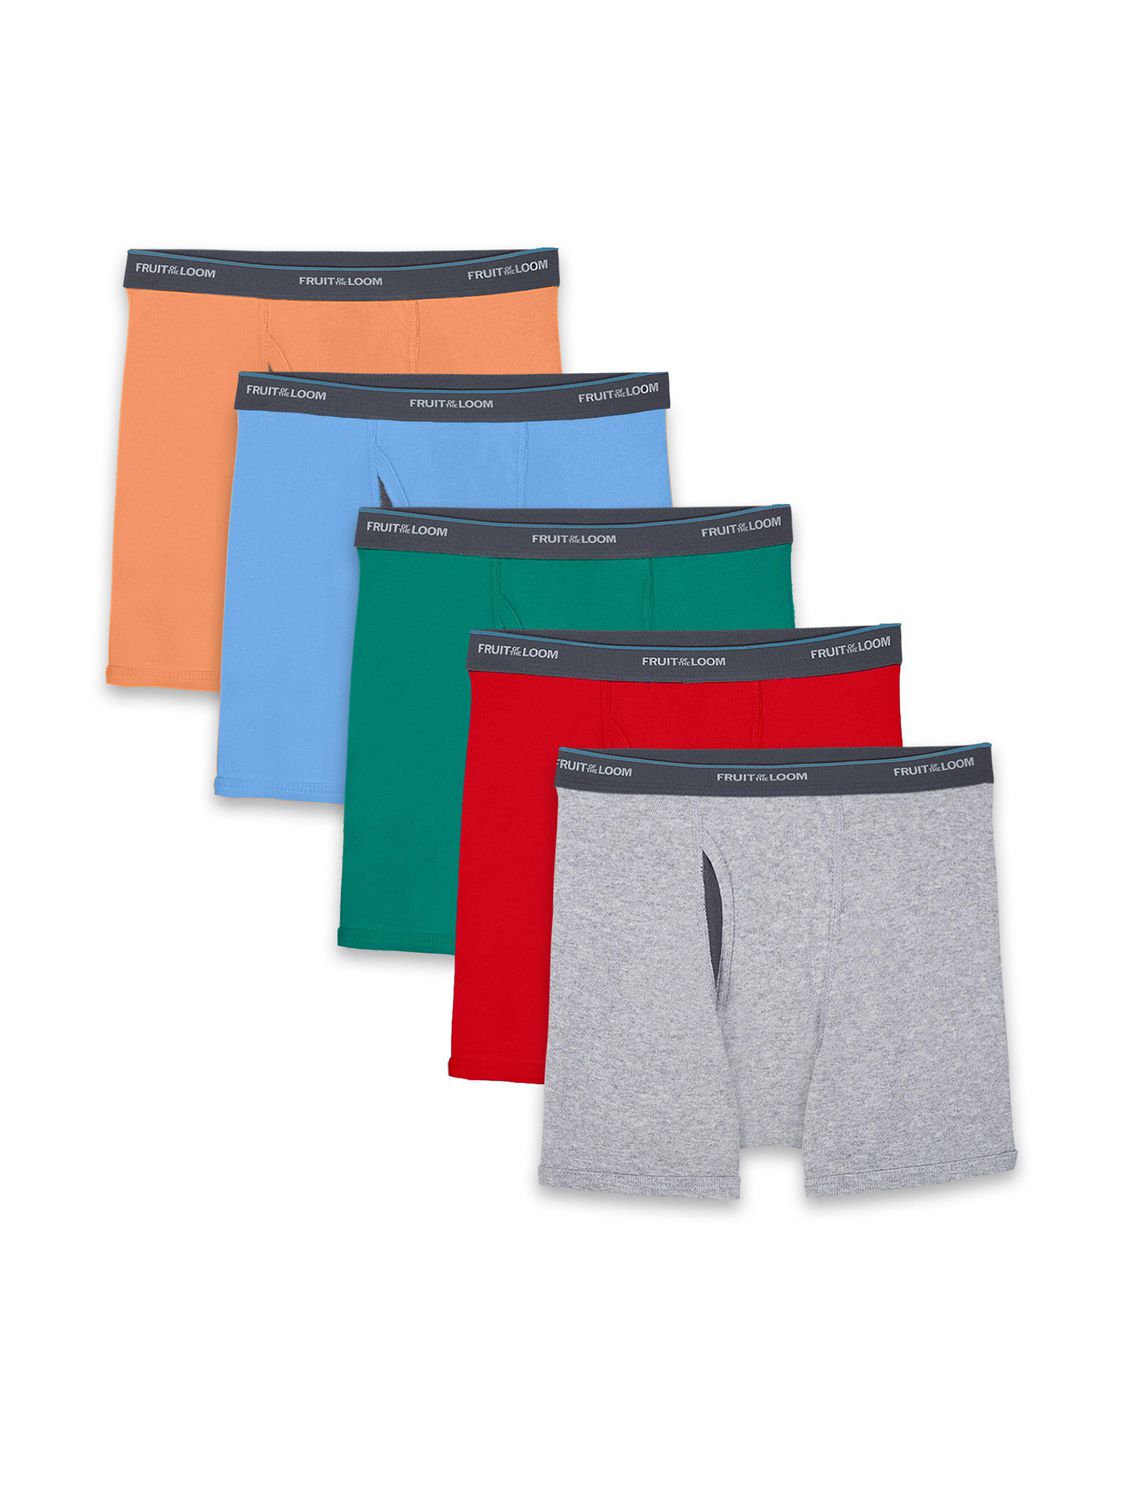 Fruit of the Loom Boys Boxer Shorts Pack of 5 